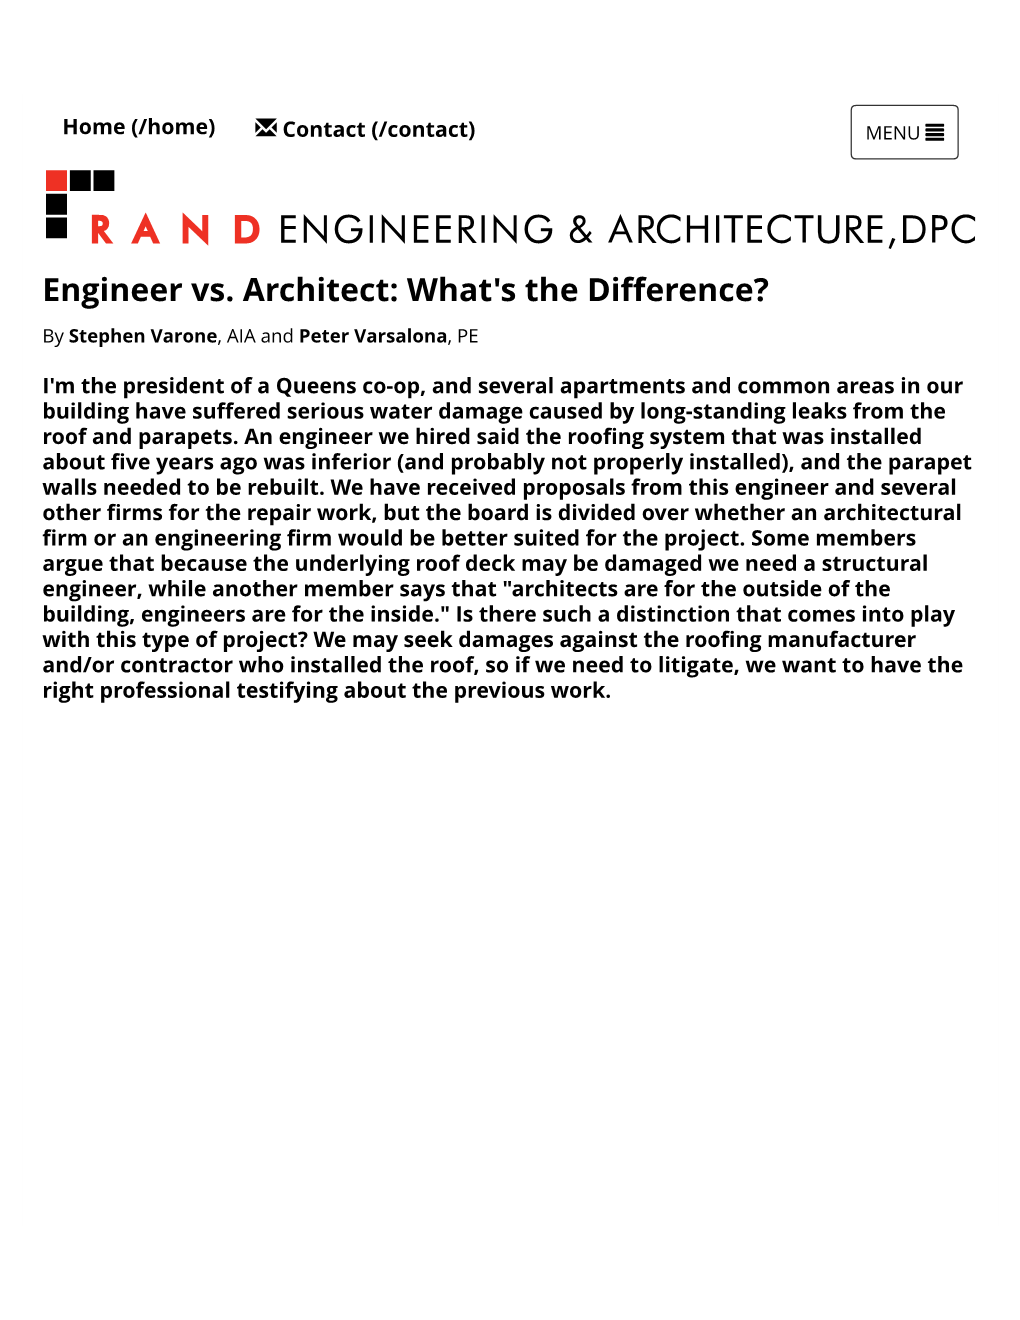 Engineer Vs. Architect: What's the Difference?